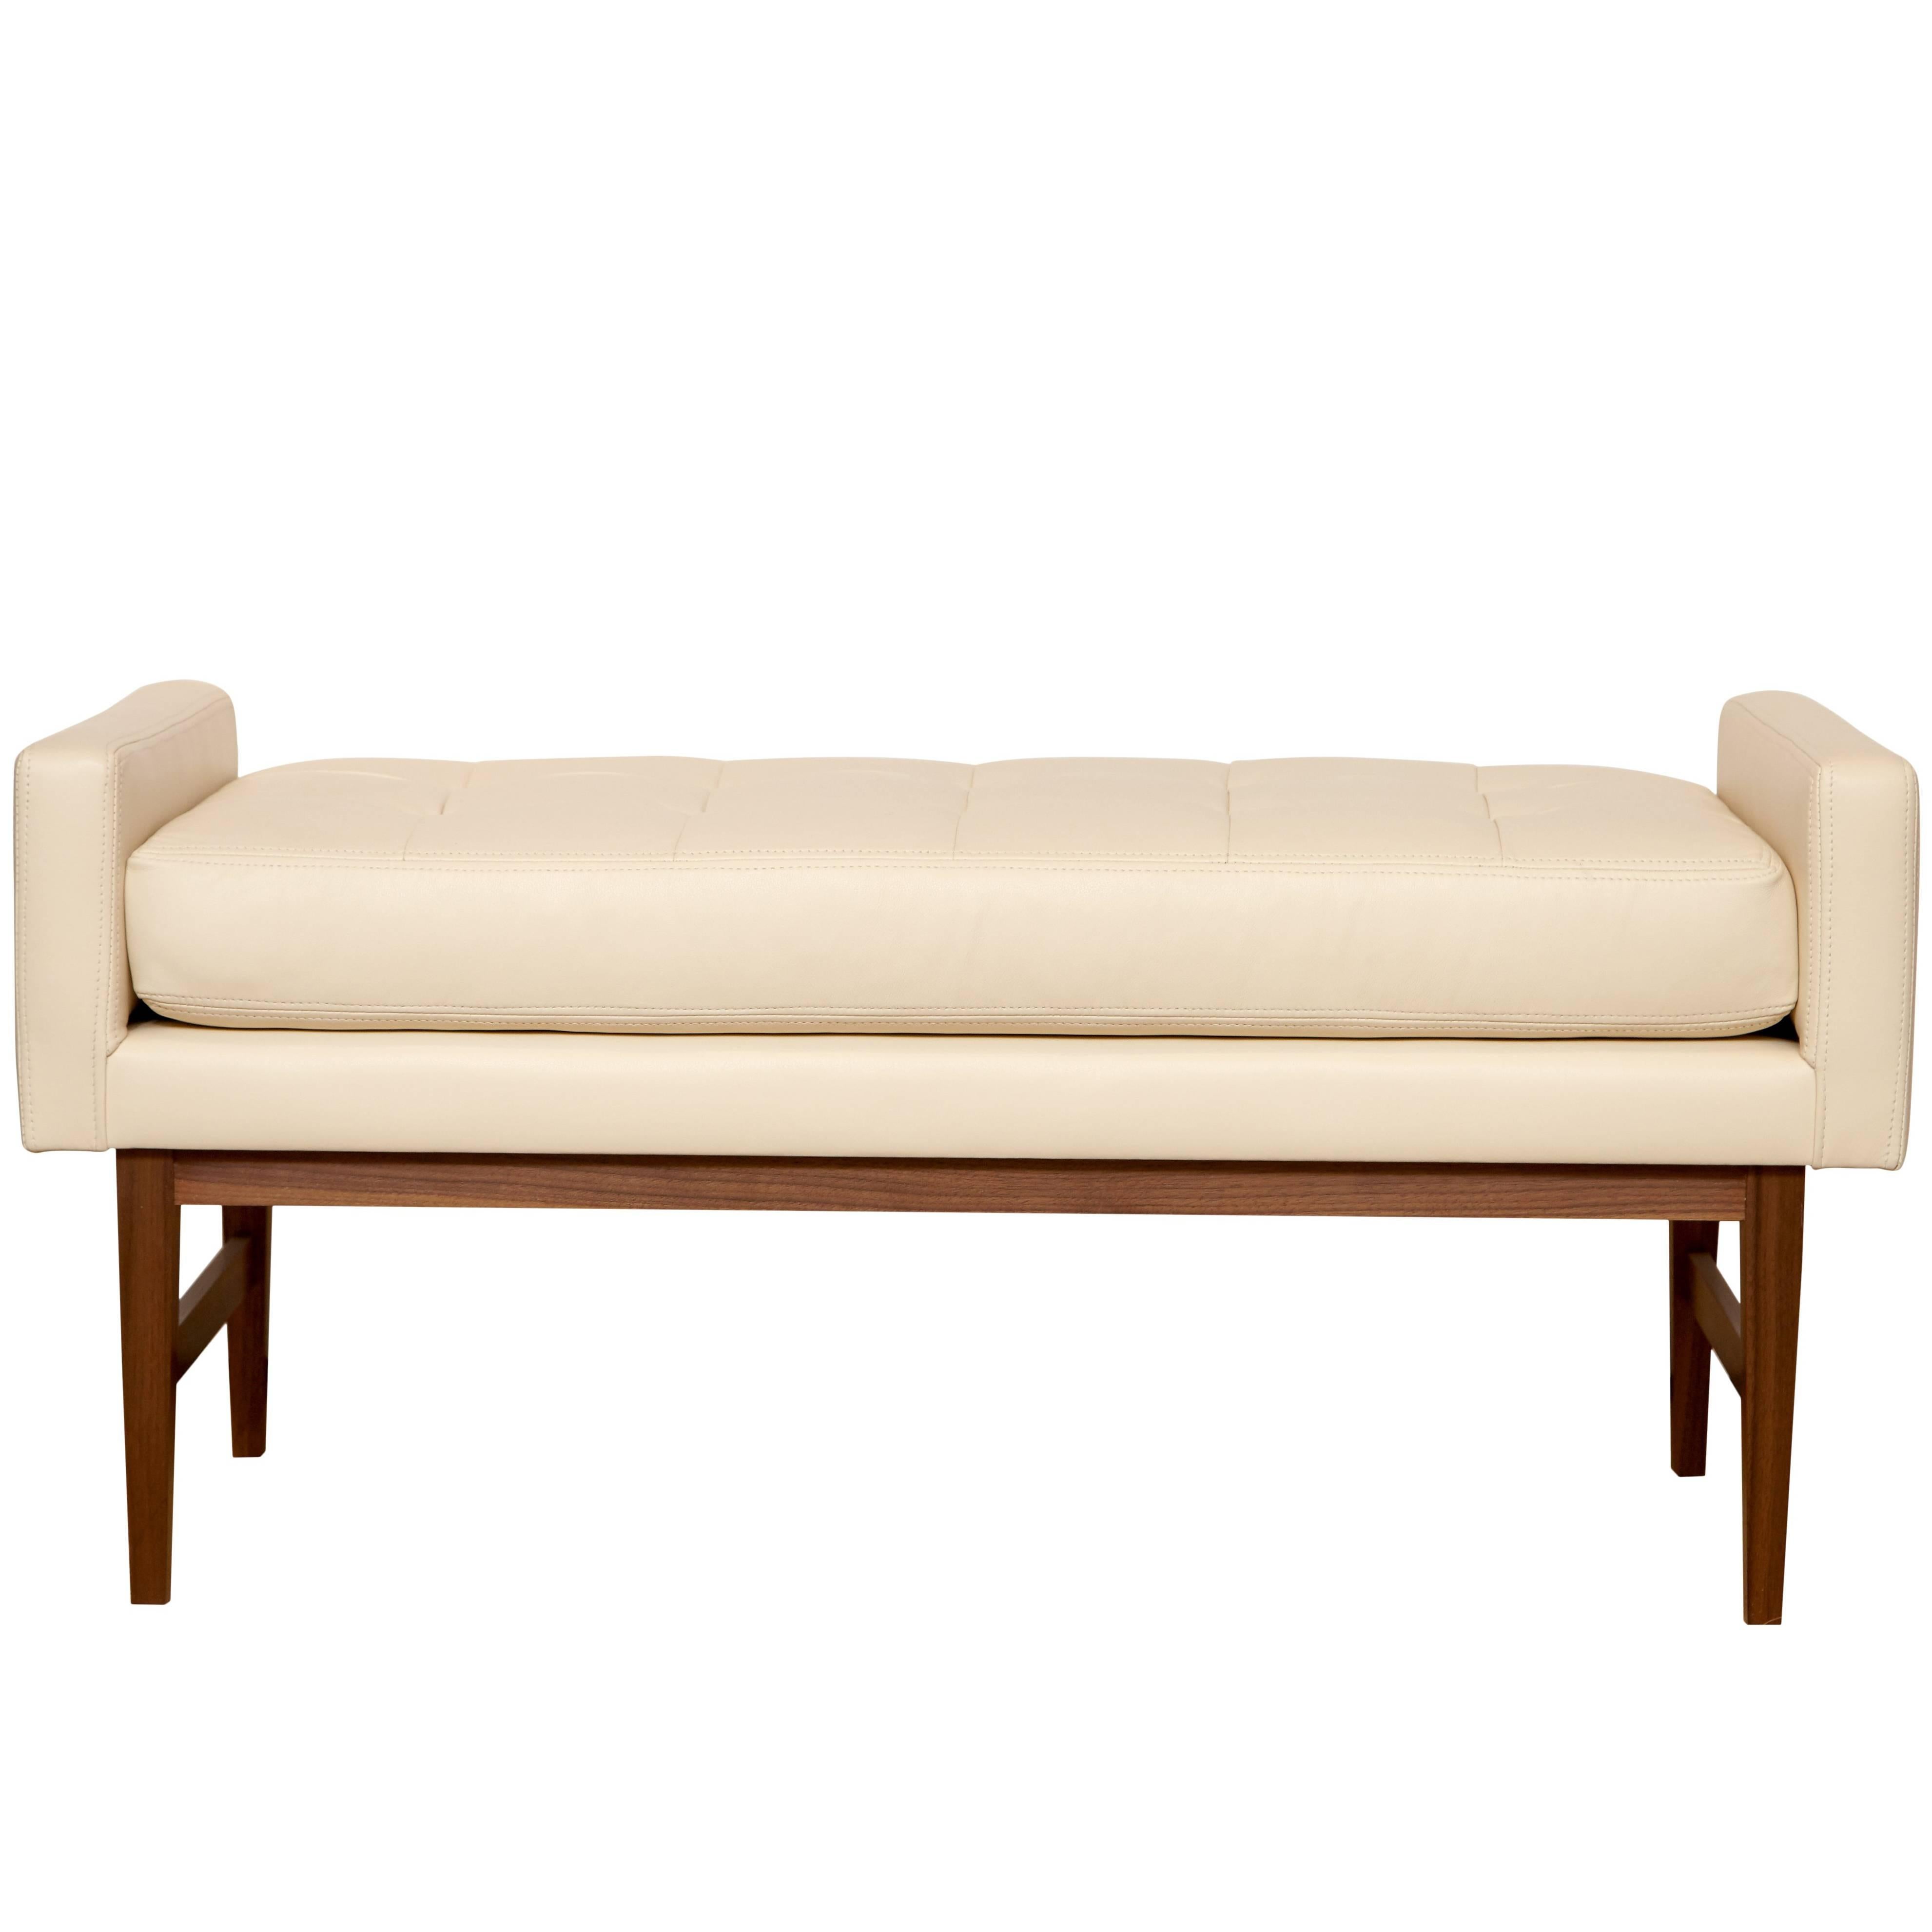 Bailey Tufted Bench For Sale